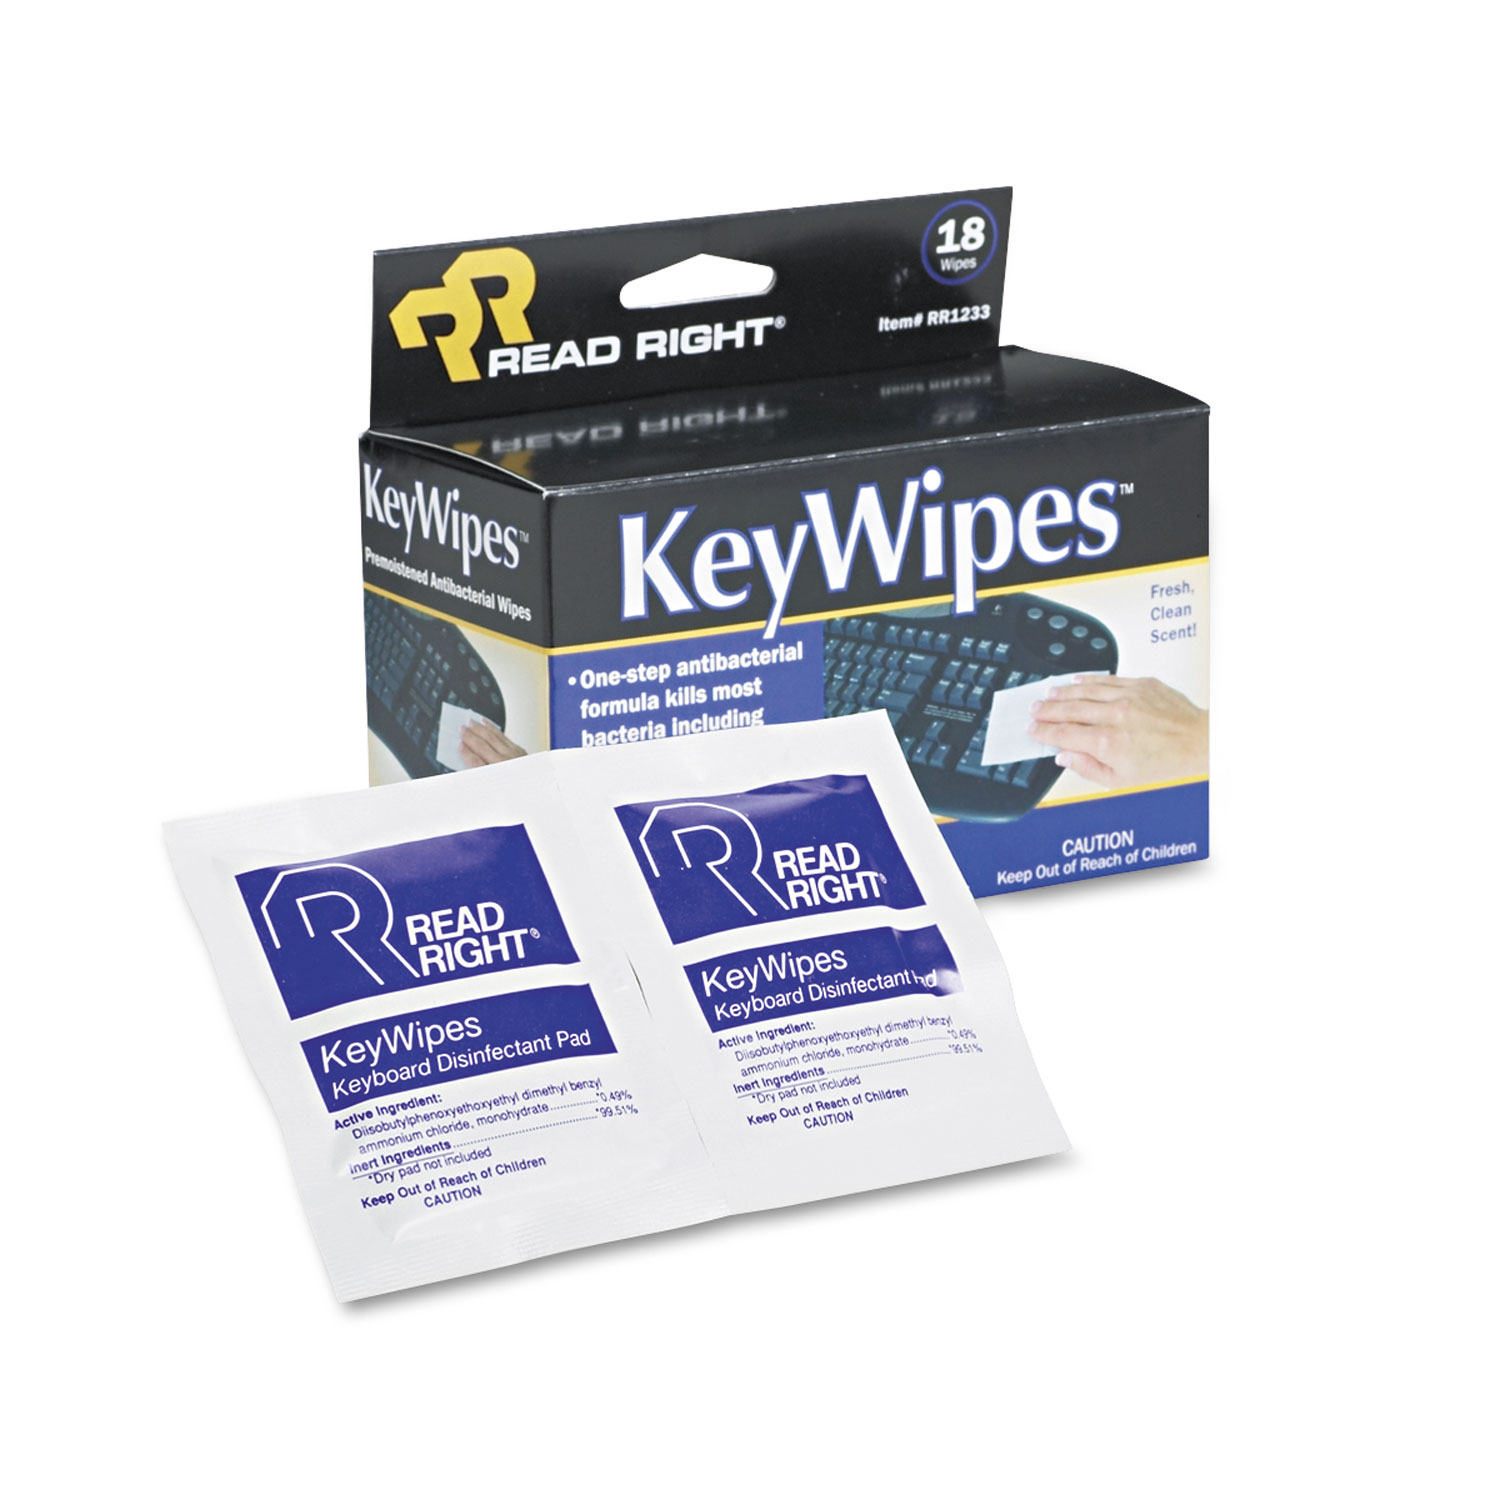 Read Right REARR1233 KeyWipes Keyboard & Hand Cleaner Wet Wipes, 5 x 6 7/8, 18/Box